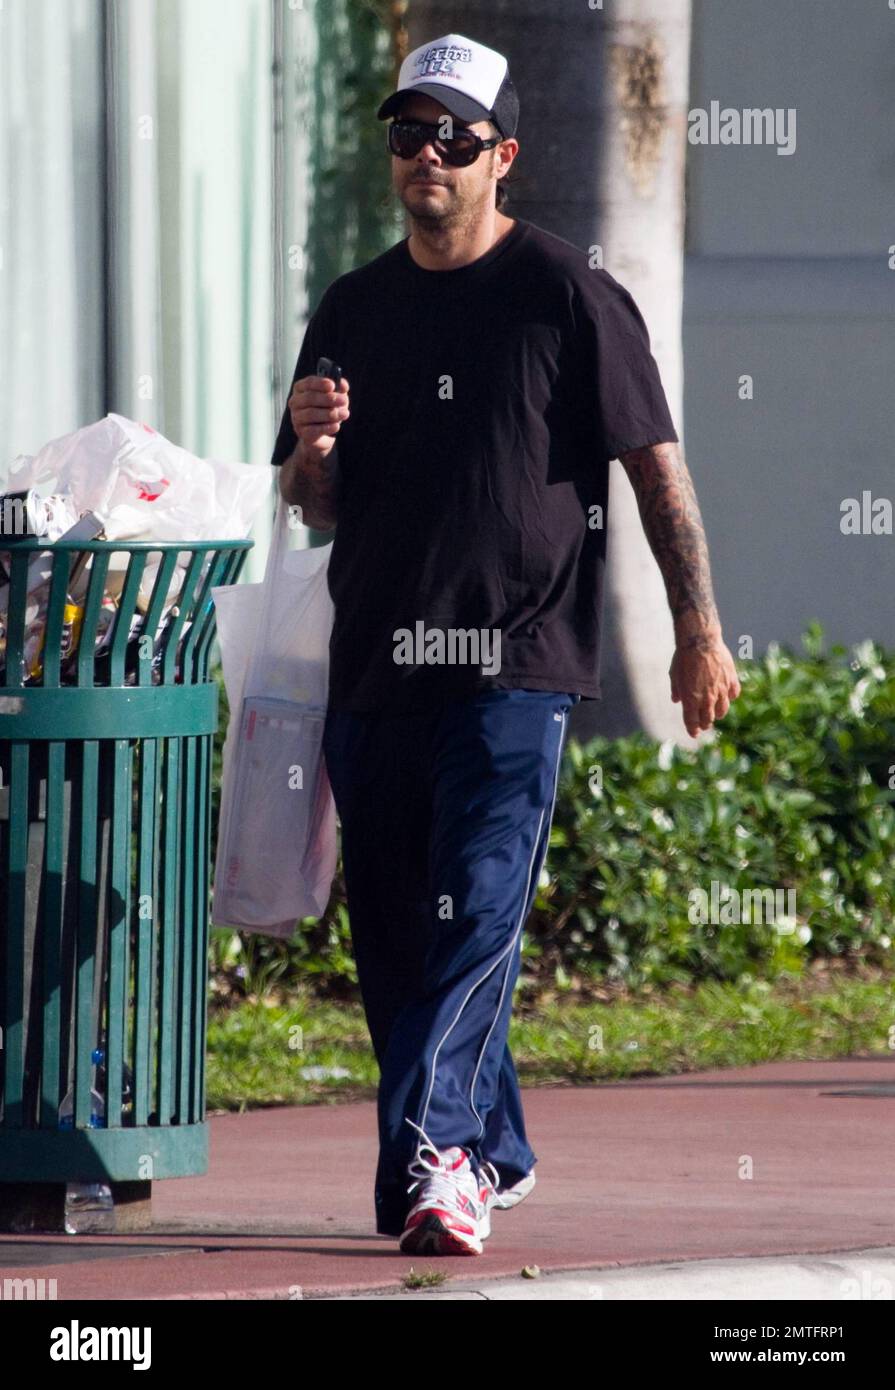 EXCLUSIVE!! Rob Patterson, boyfriend of Carmen Electra, shows off his  scruffy unshaven face while out and about Miami Beach in his sweats. Rob,  who is the guitarist for nu metal band Otep